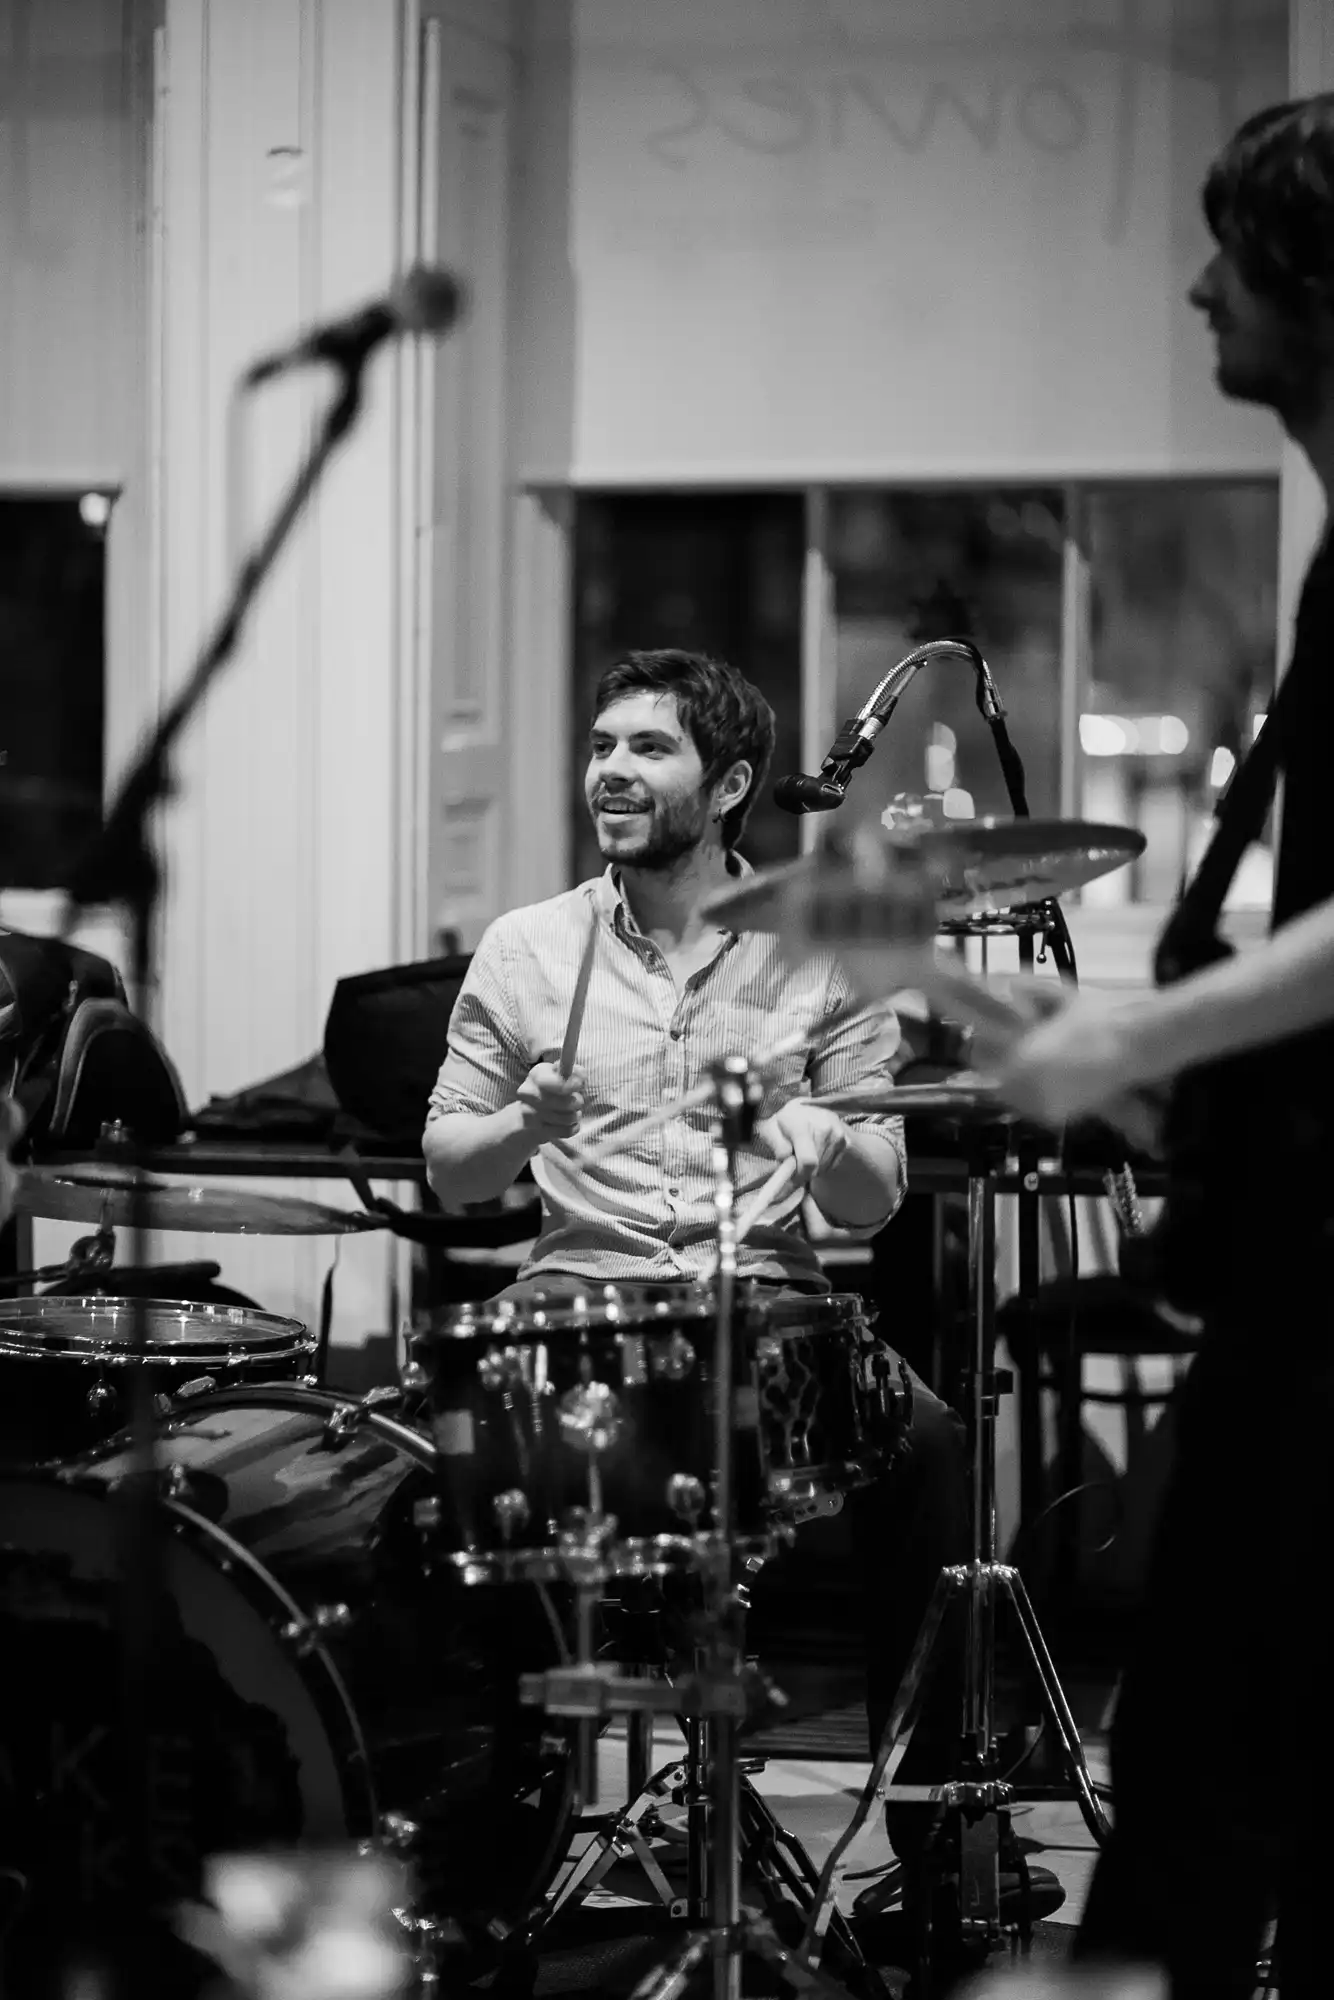 A smiling drummer sitting at his drum set, engaging with bandmates in a monochrome indoor setting.